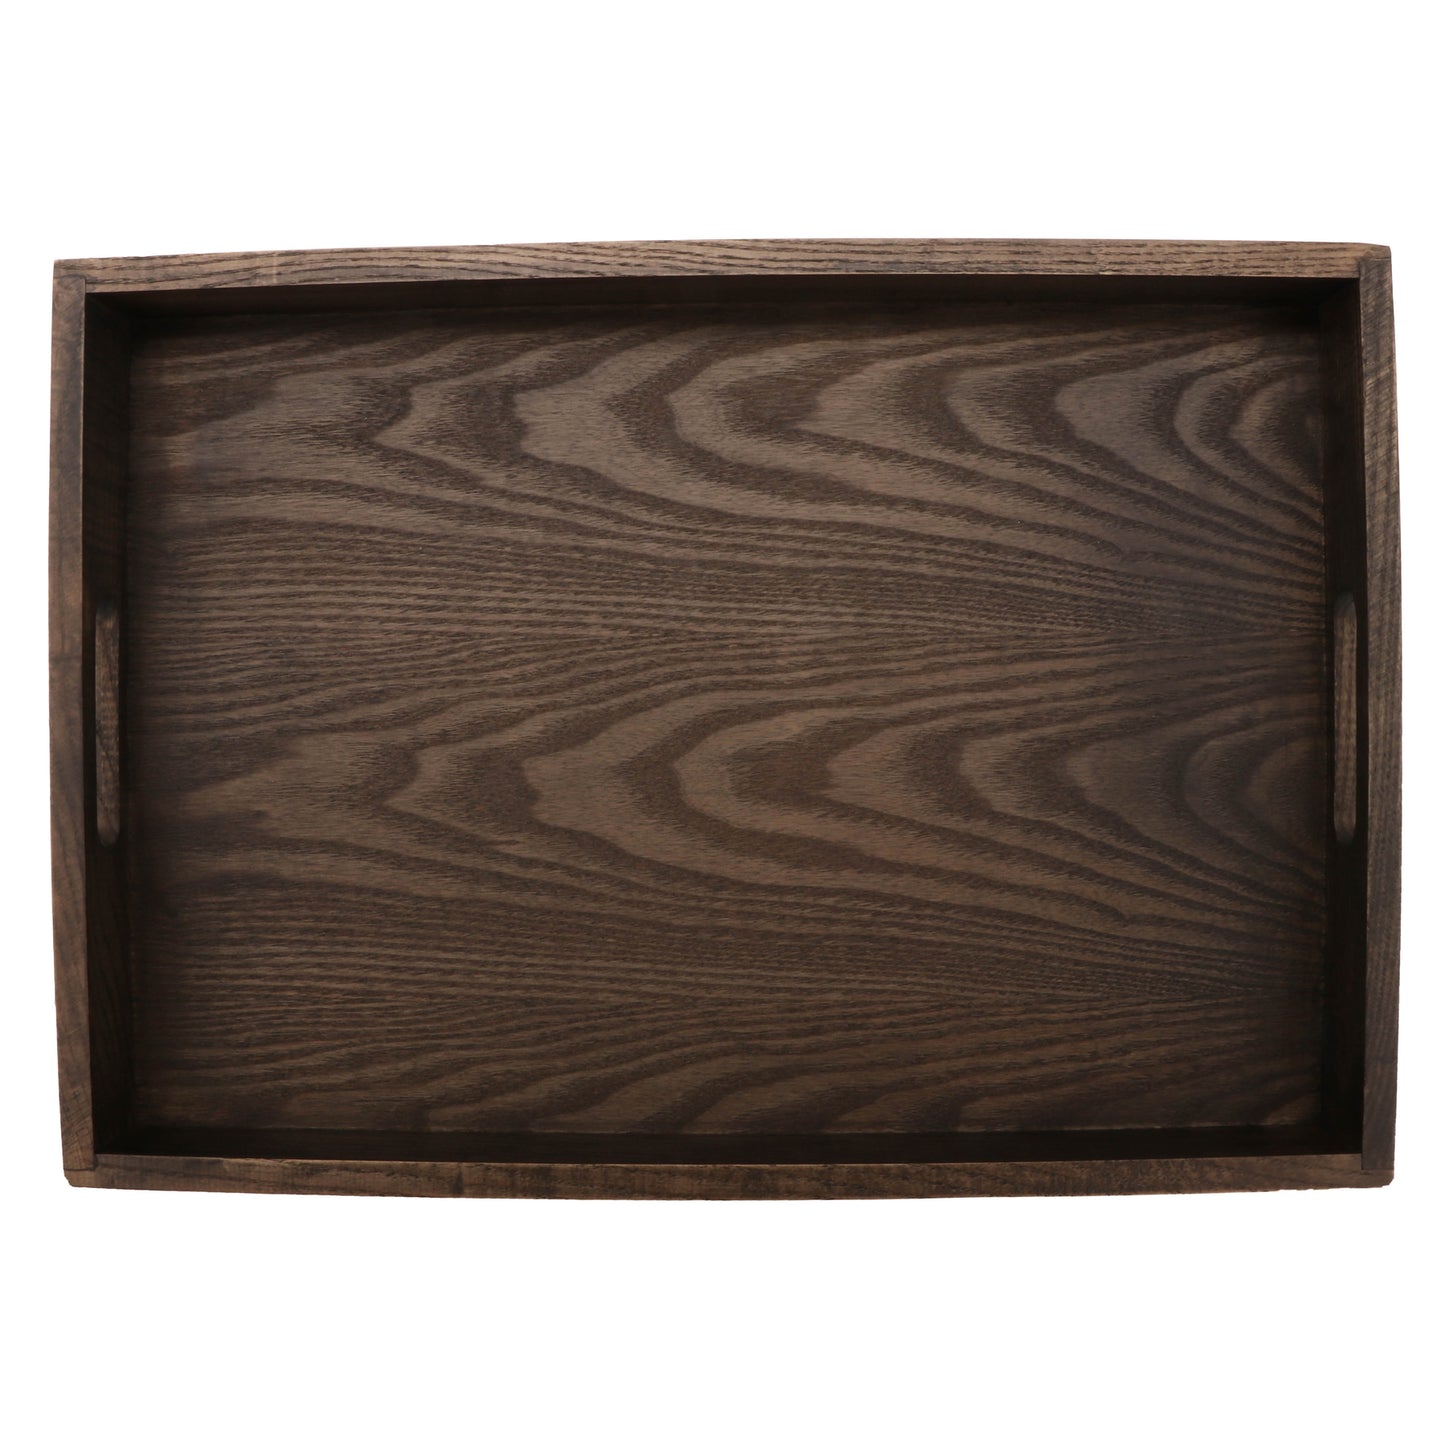 19.75" x 14.75" x 1.75" OD (19" x 14" ID), Wood Tap Root Tray, Grey Ash Color , With Handles